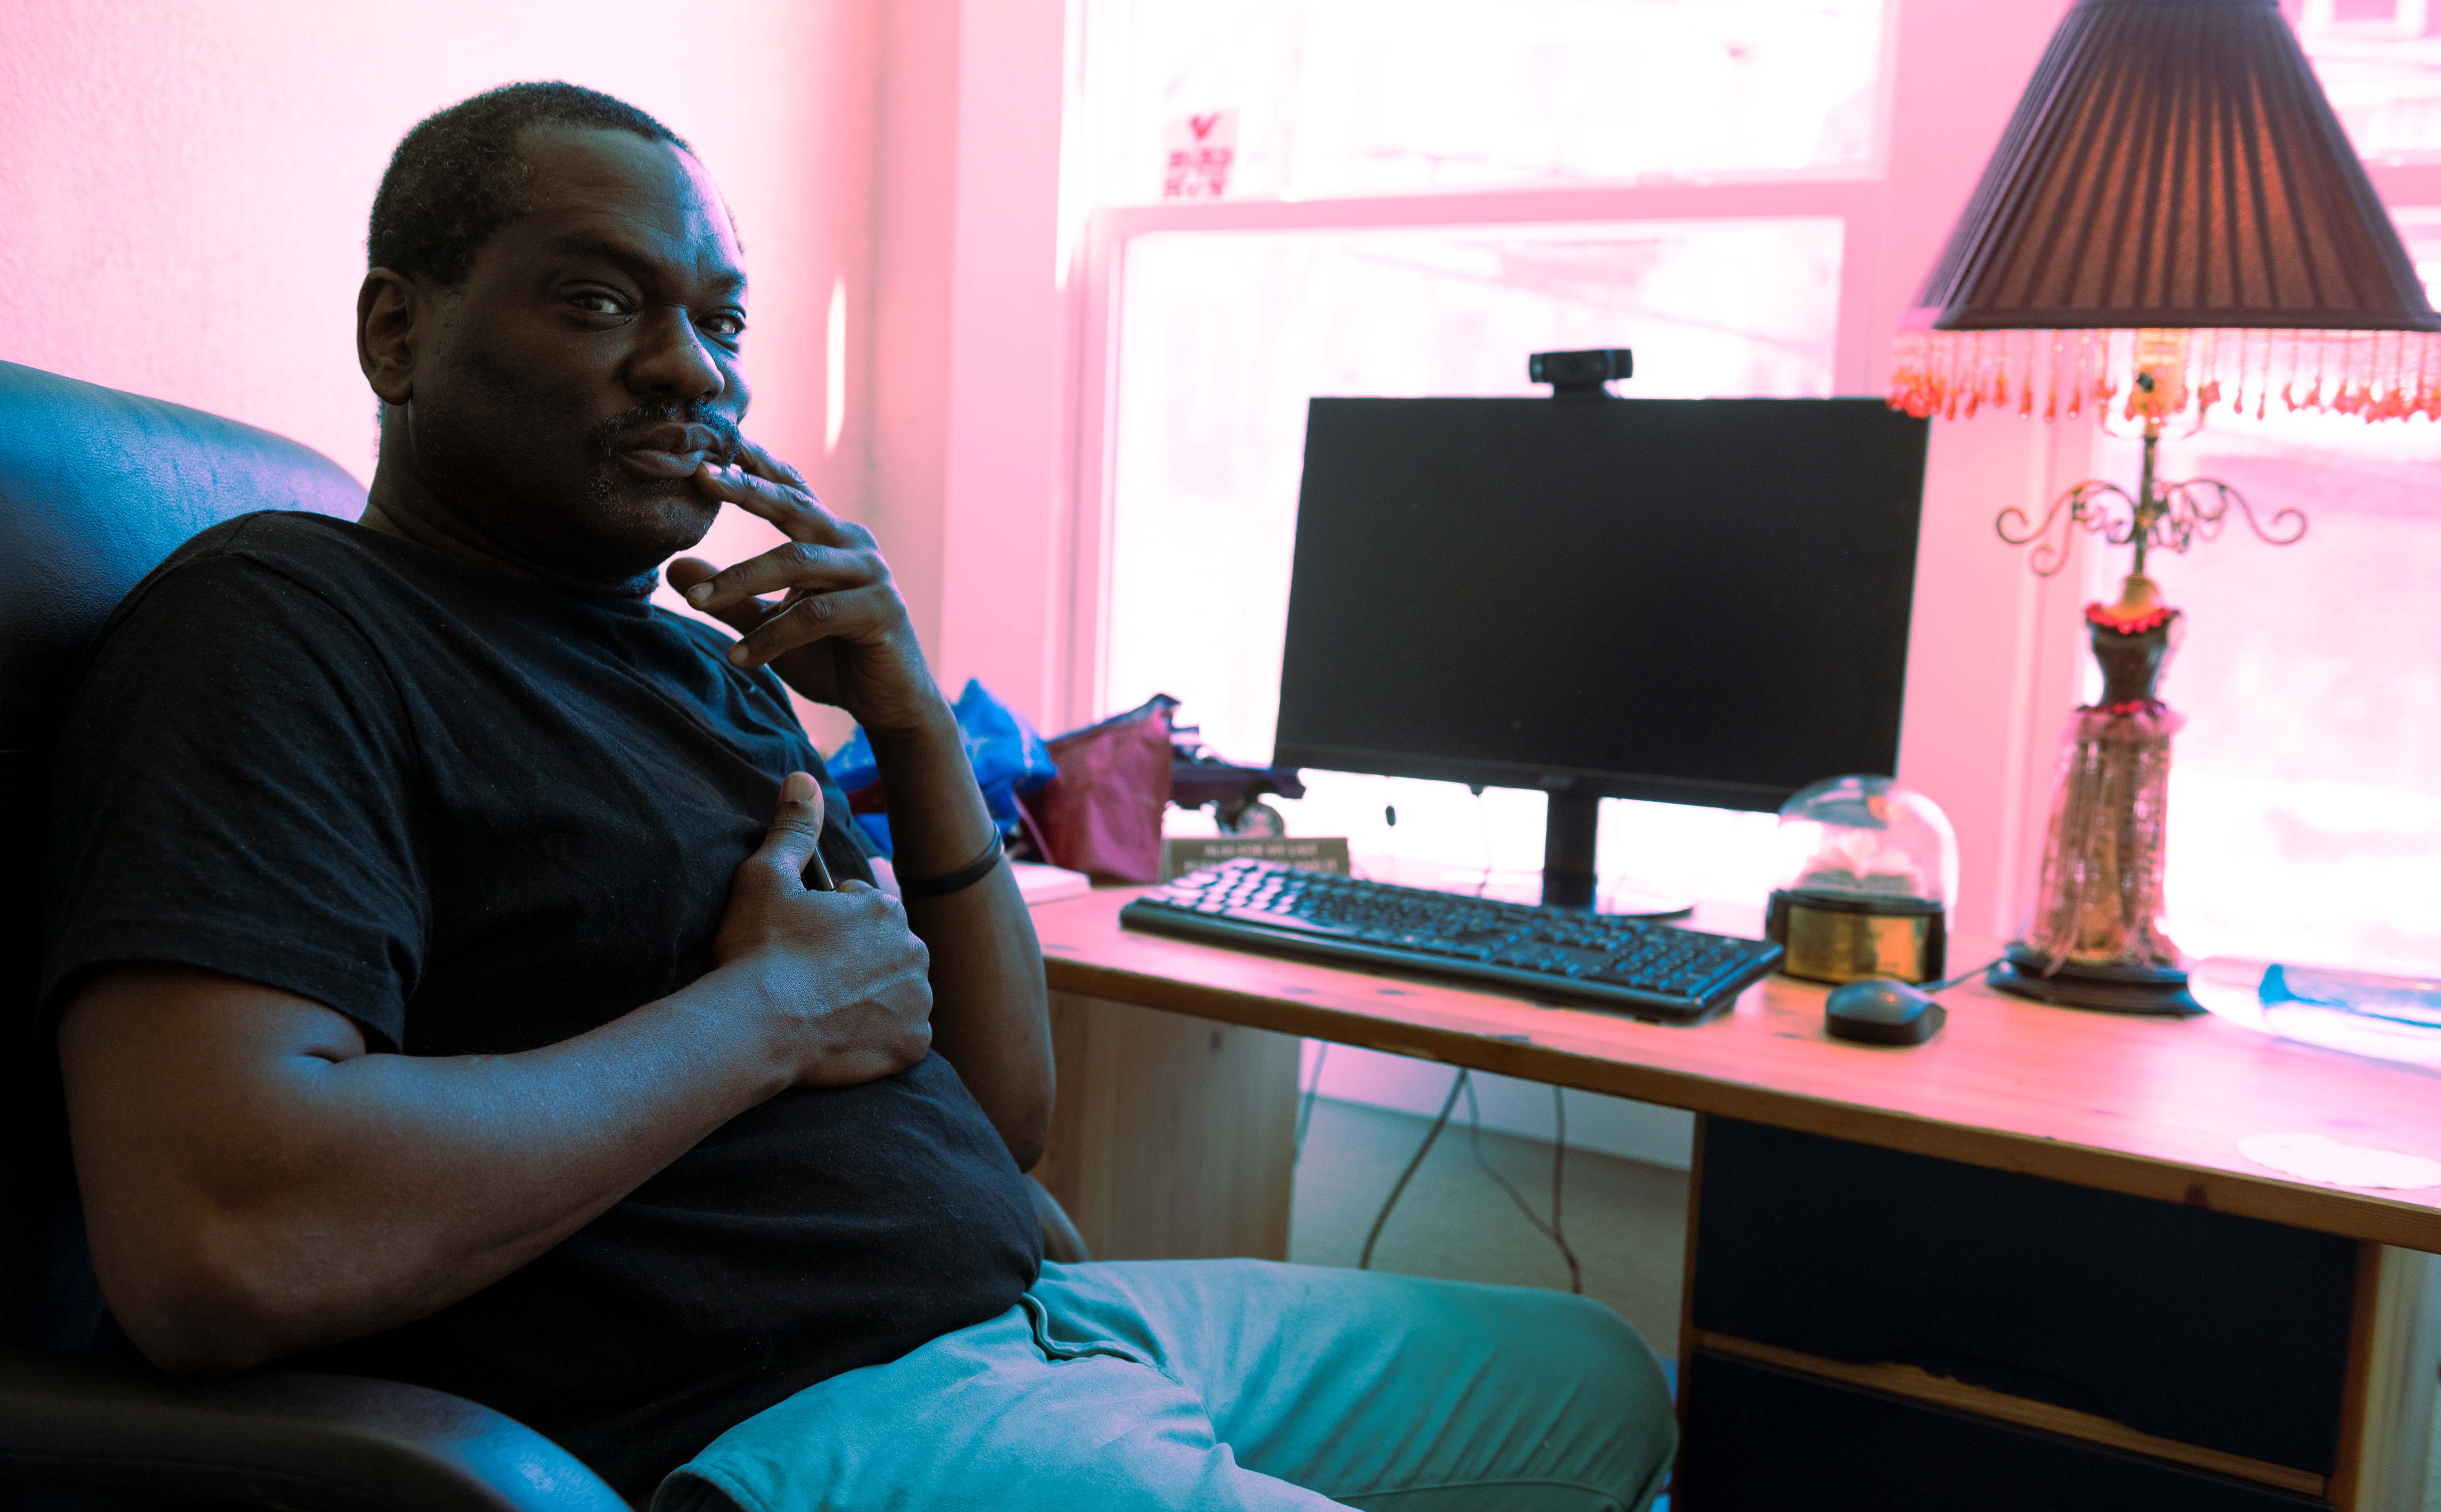 Black man in black t-shirt and turquoise slacks sits at a desk in front of a window, with a computer monitor, keyboard and table lap 